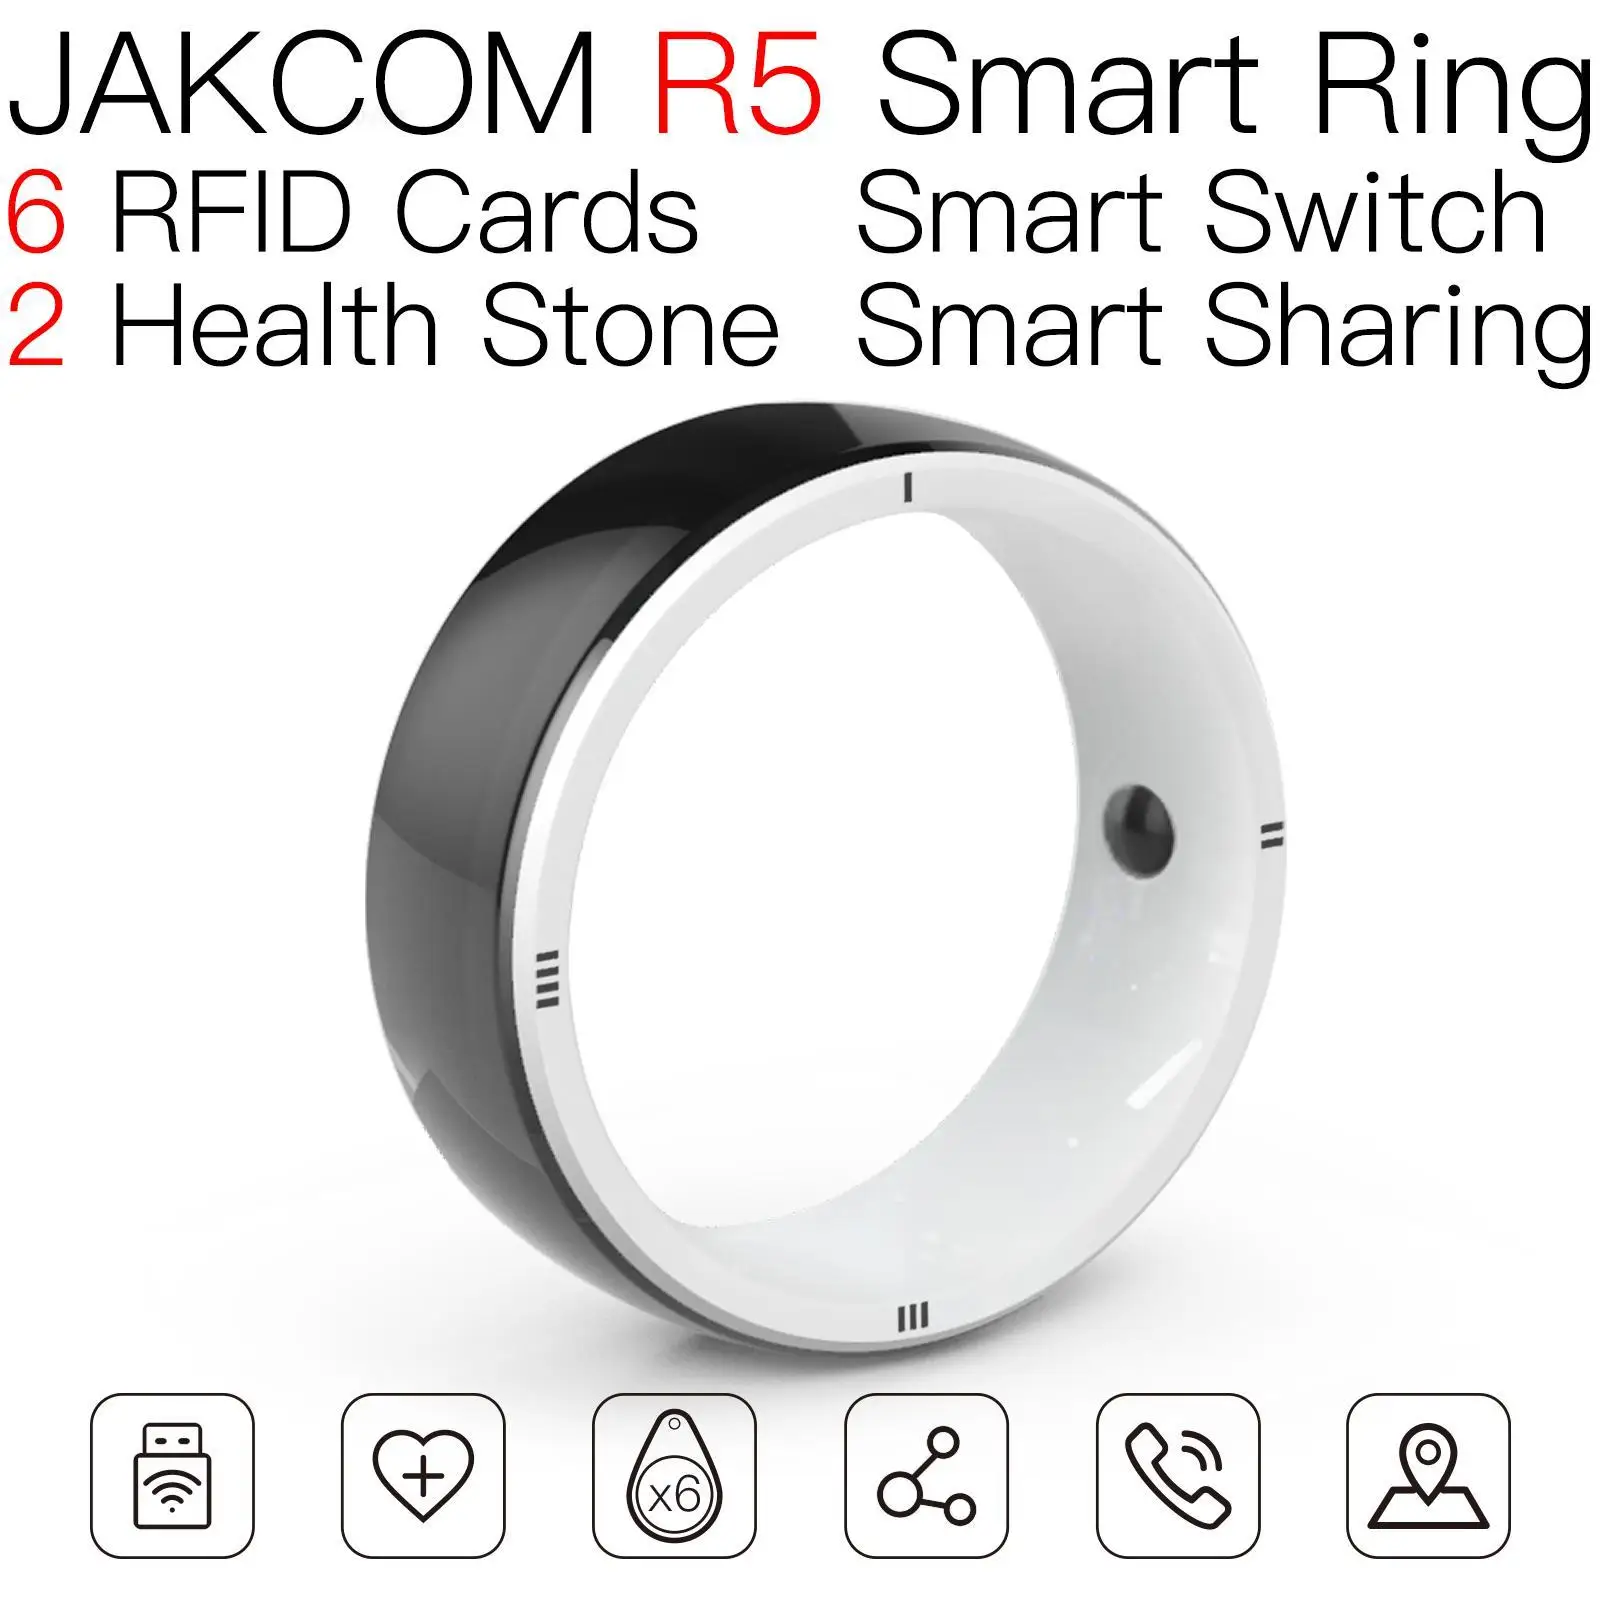 

JAKCOM R5 Smart Ring Newer than clone chip rewritable nfc jeux switch kart 8 deluxe switch uhf ic uid rfid tag sticker ring